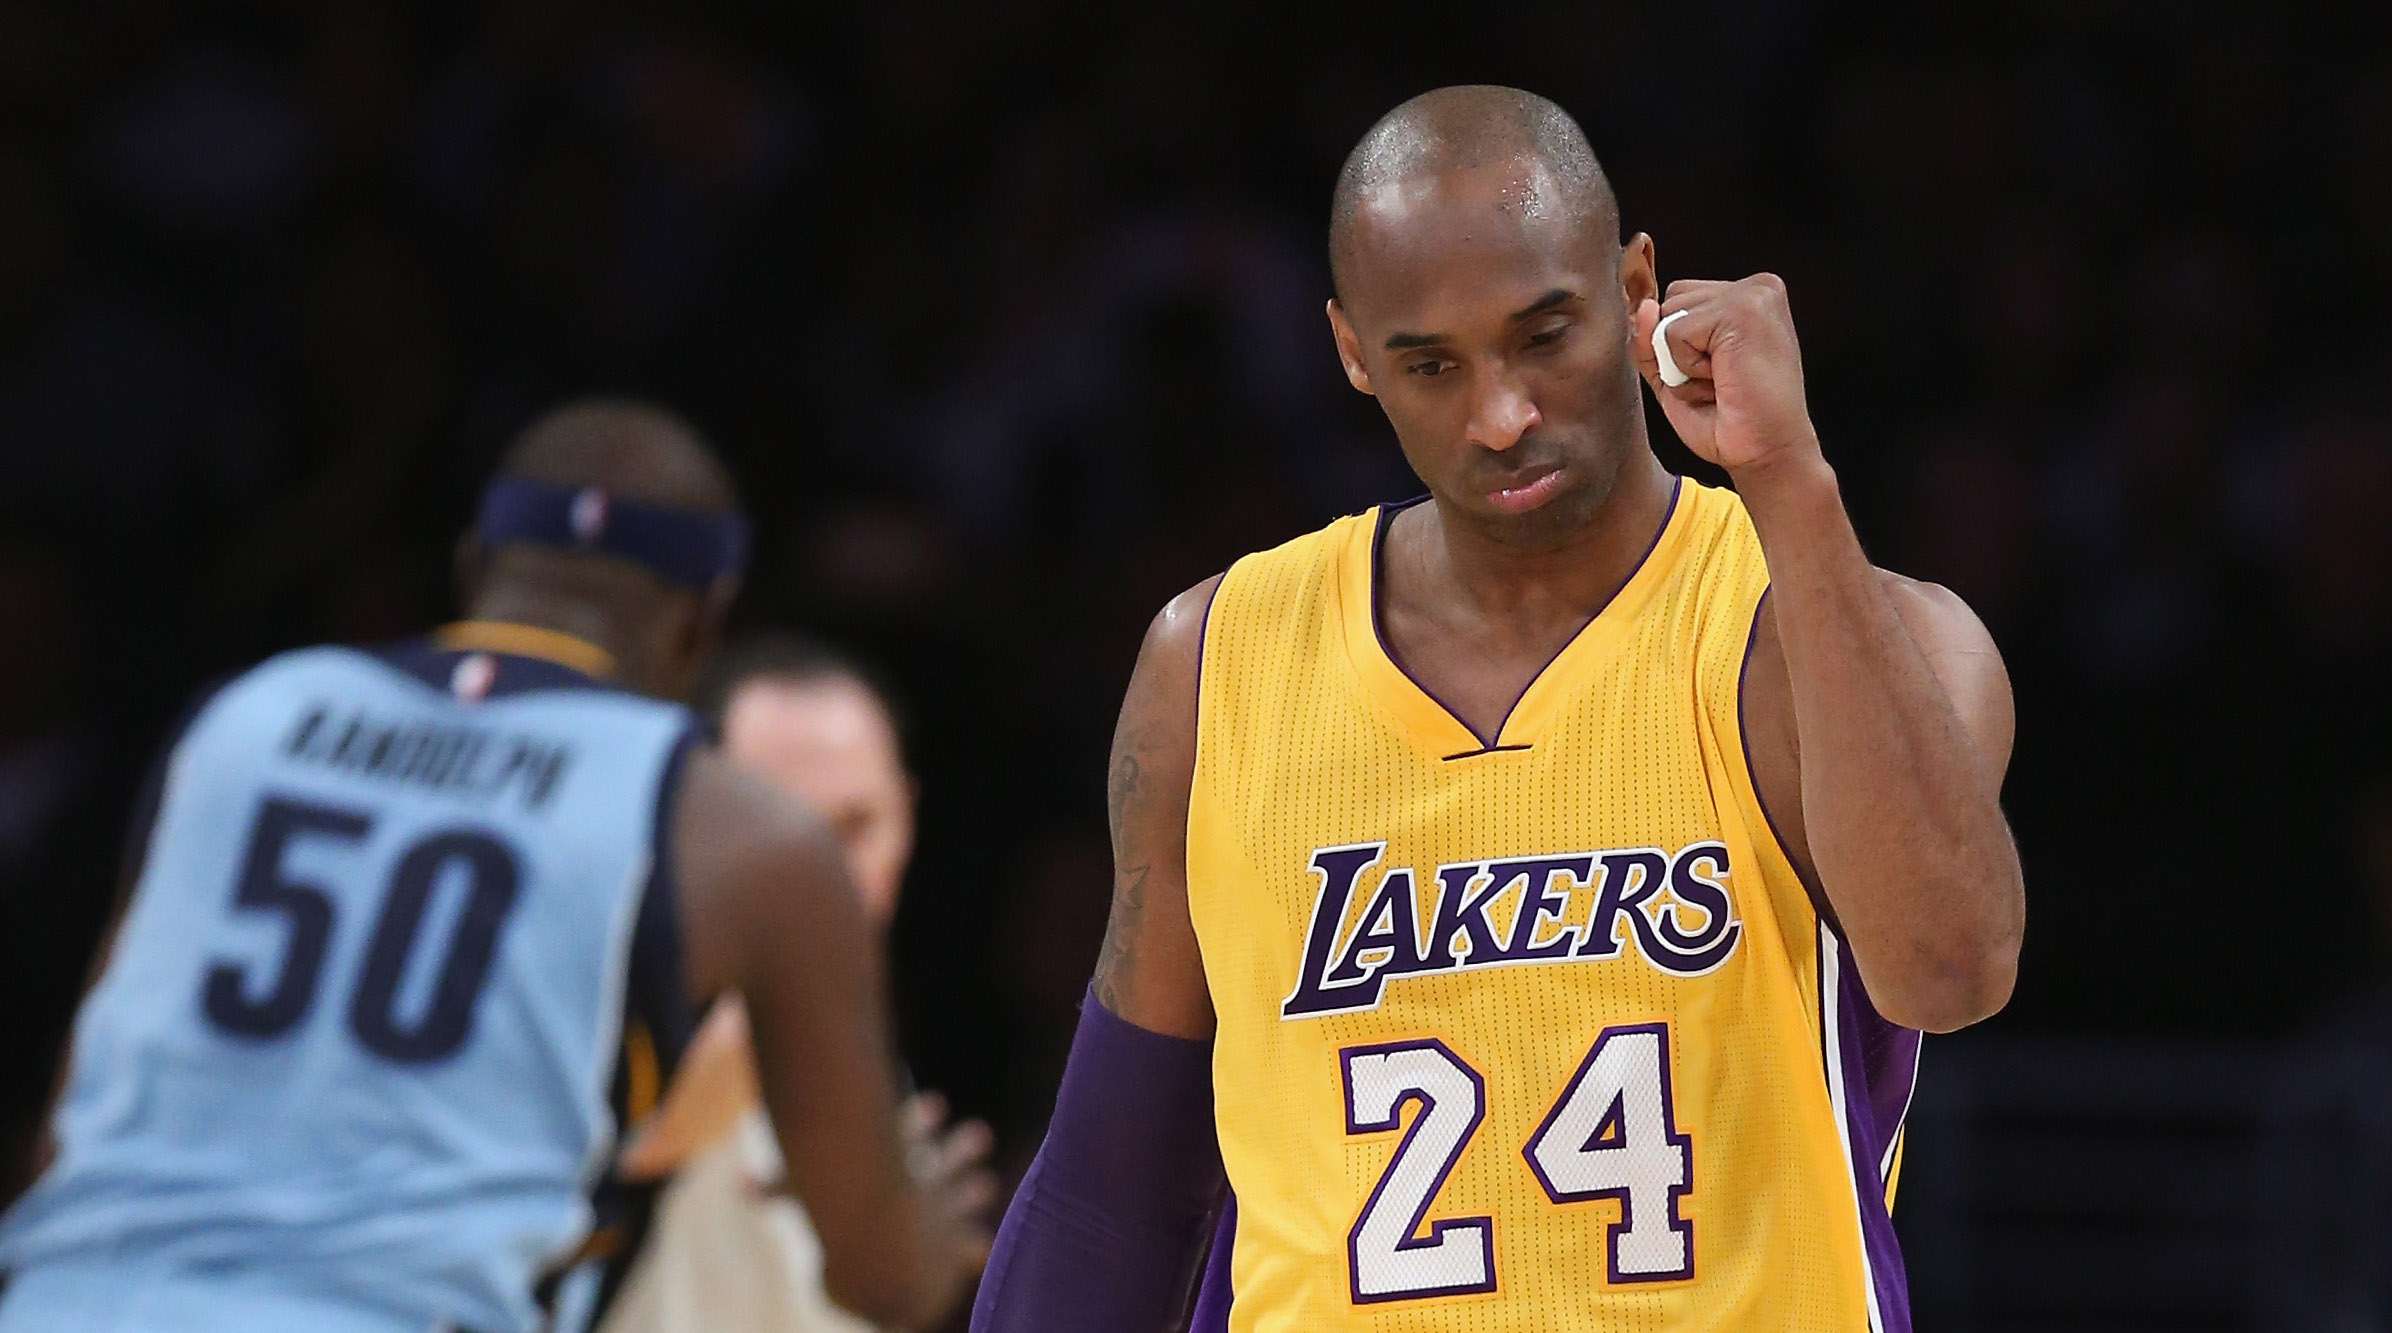 Kobe Bryant's Next Nike Signature Shoe, The Mamba Focus, Has Been Revealed  In The EU - BroBible